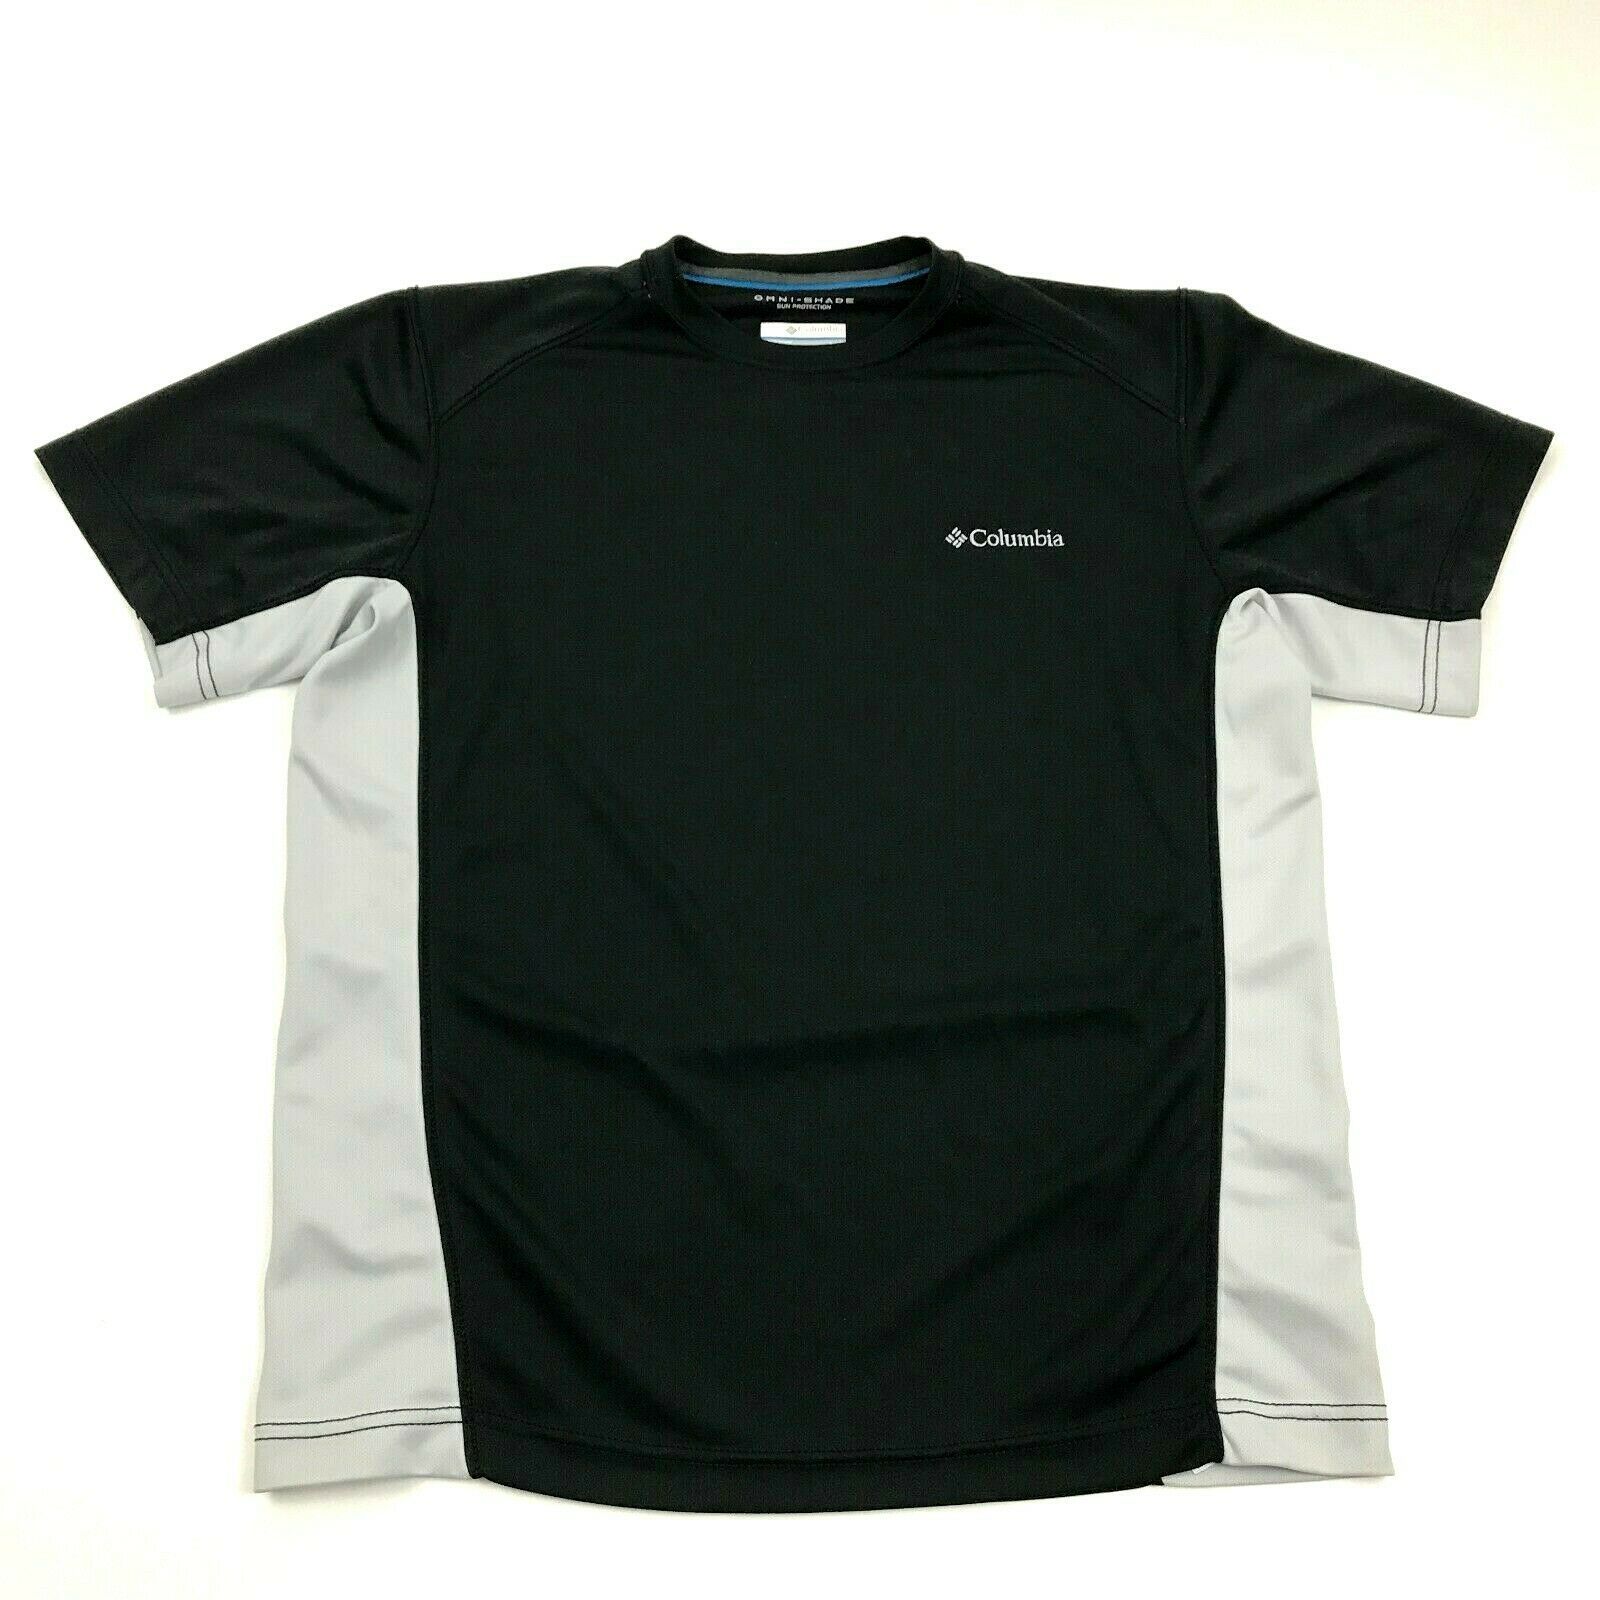 Columbia OMNI-SHADE Dry Fit Shirt Size S Small Adult Black SUN ...